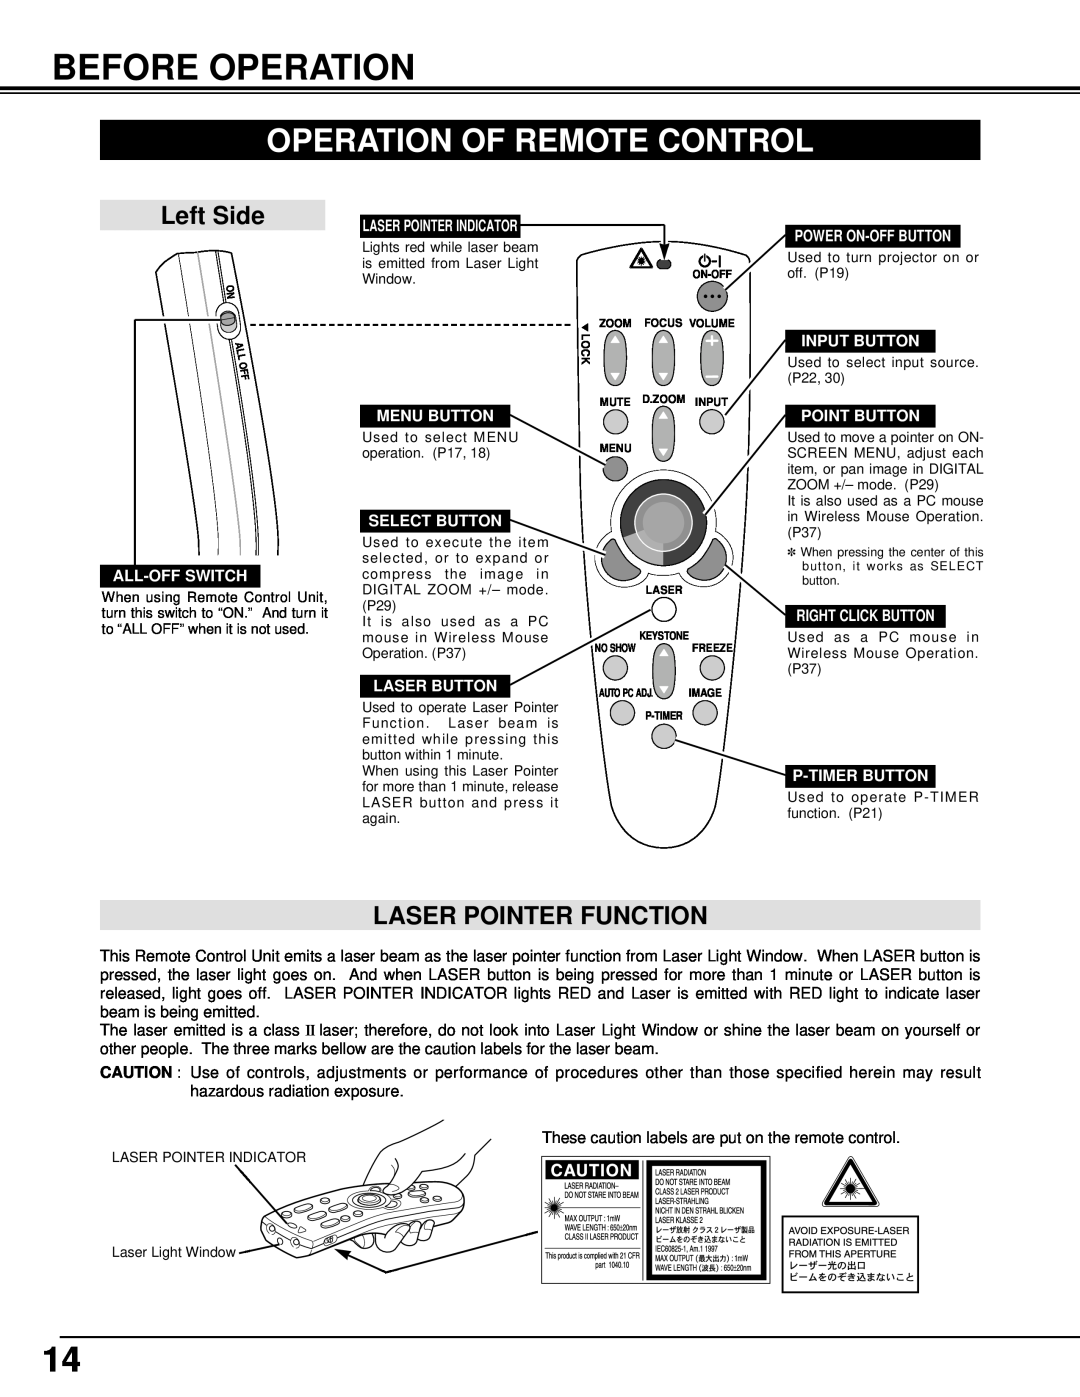 Eiki LC-XNB3W owner manual Before Operation, Operation Of Remote Control, Left Side, Laser Pointer Function 